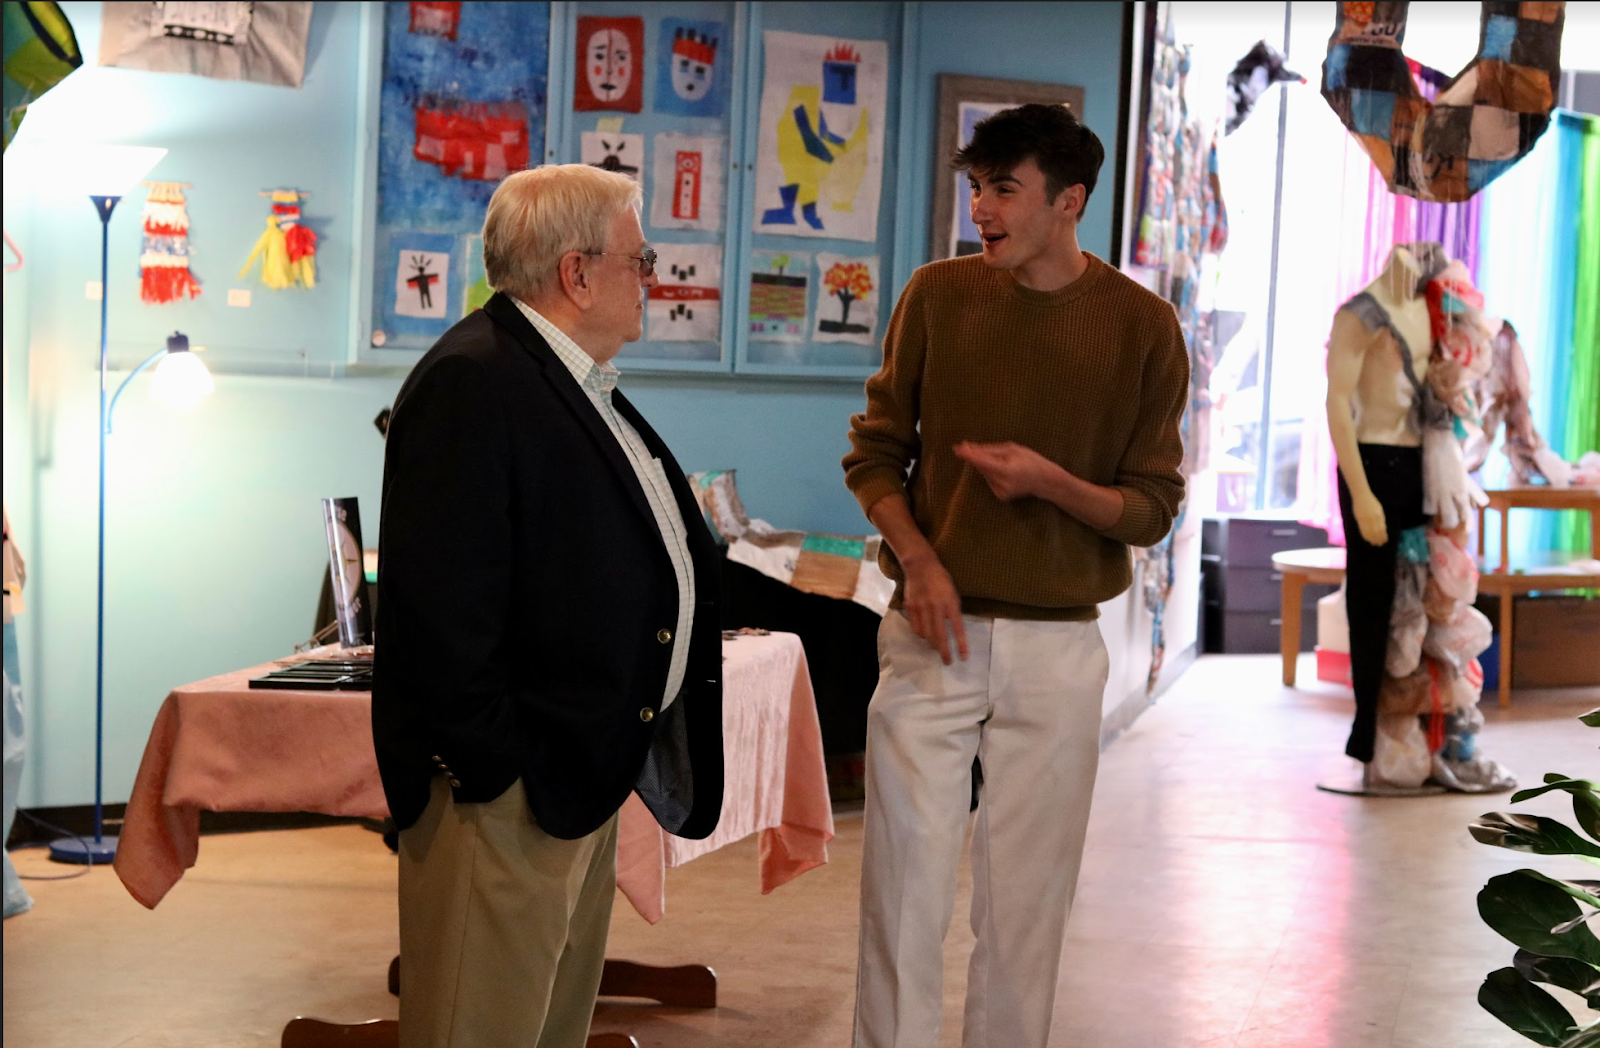 Man wearing a suit jacket talking to a man in a brown sweater